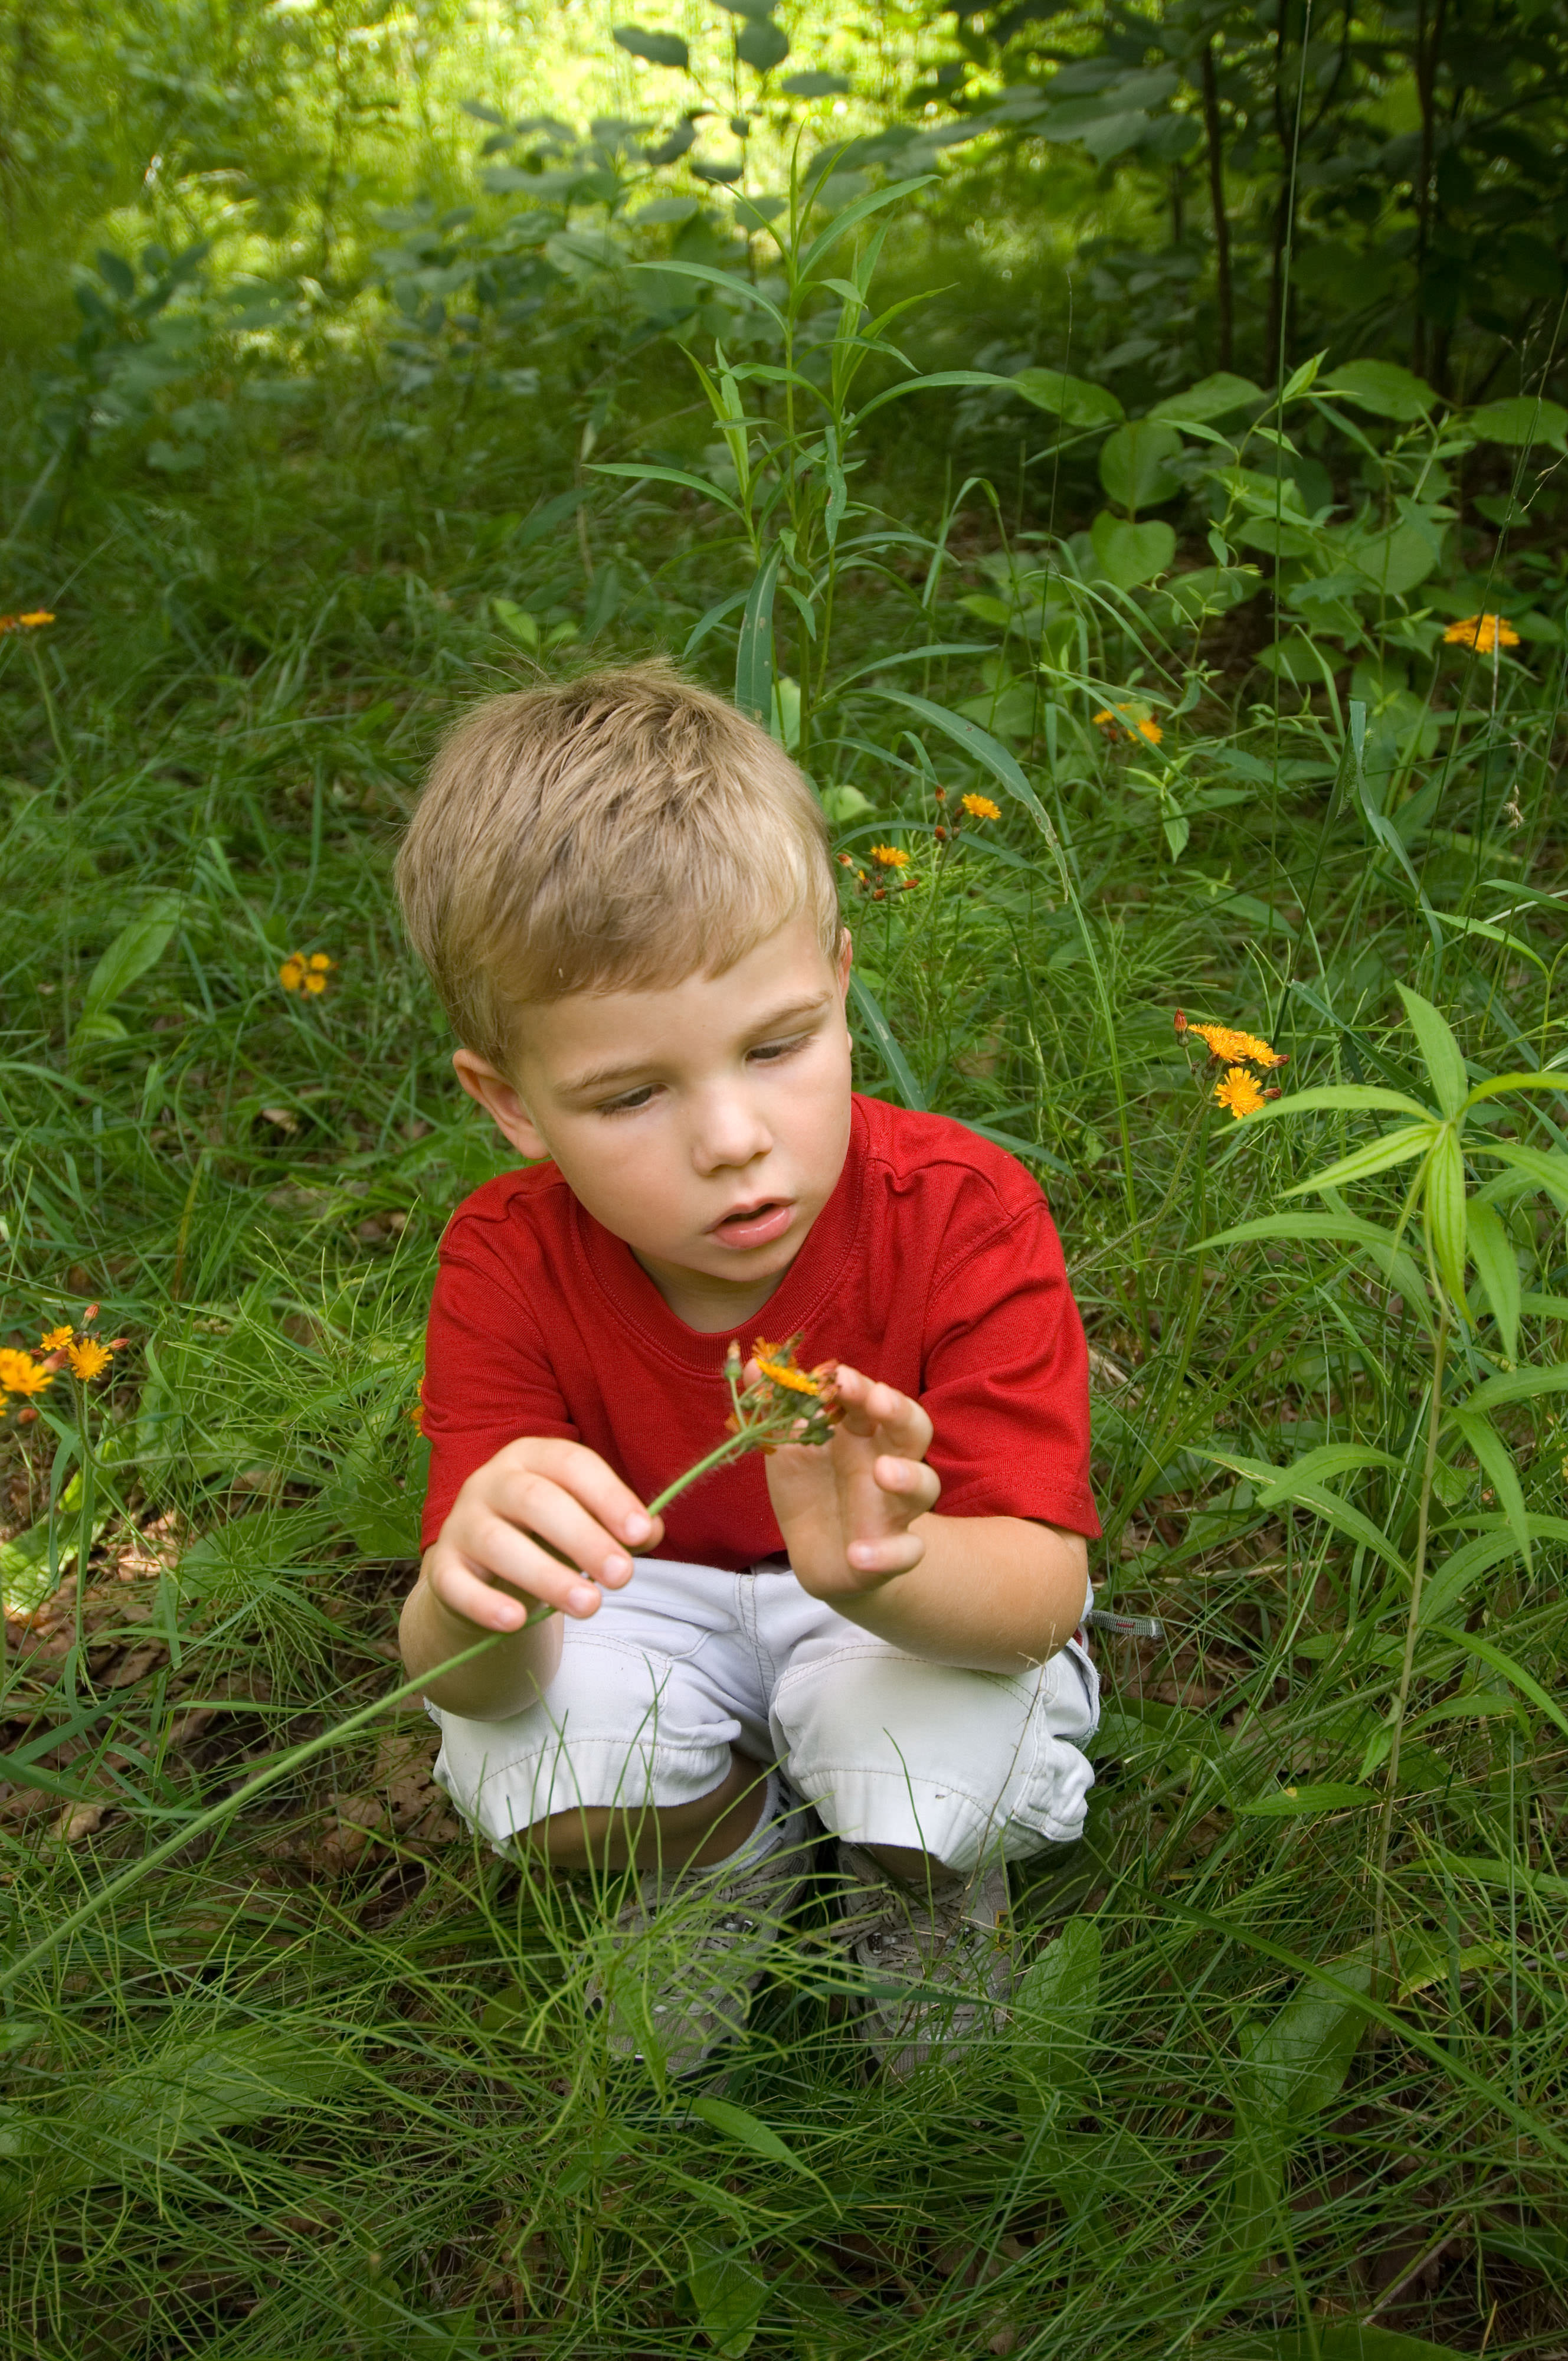 A young boy in a red shirt examines a yellow flower.